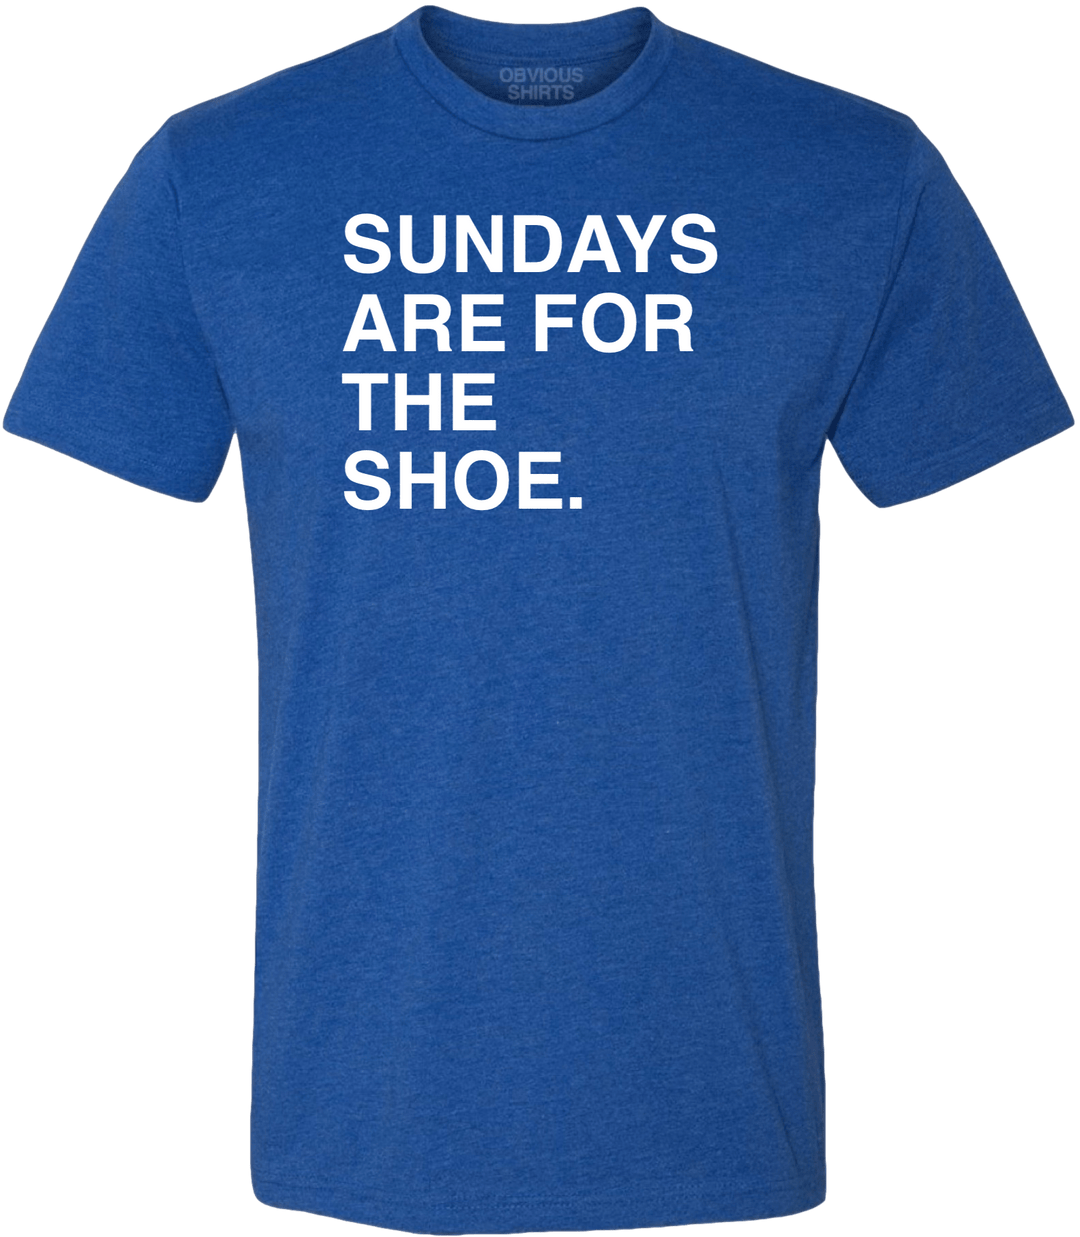 SUNDAYS ARE FOR THE SHOE. - OBVIOUS SHIRTS